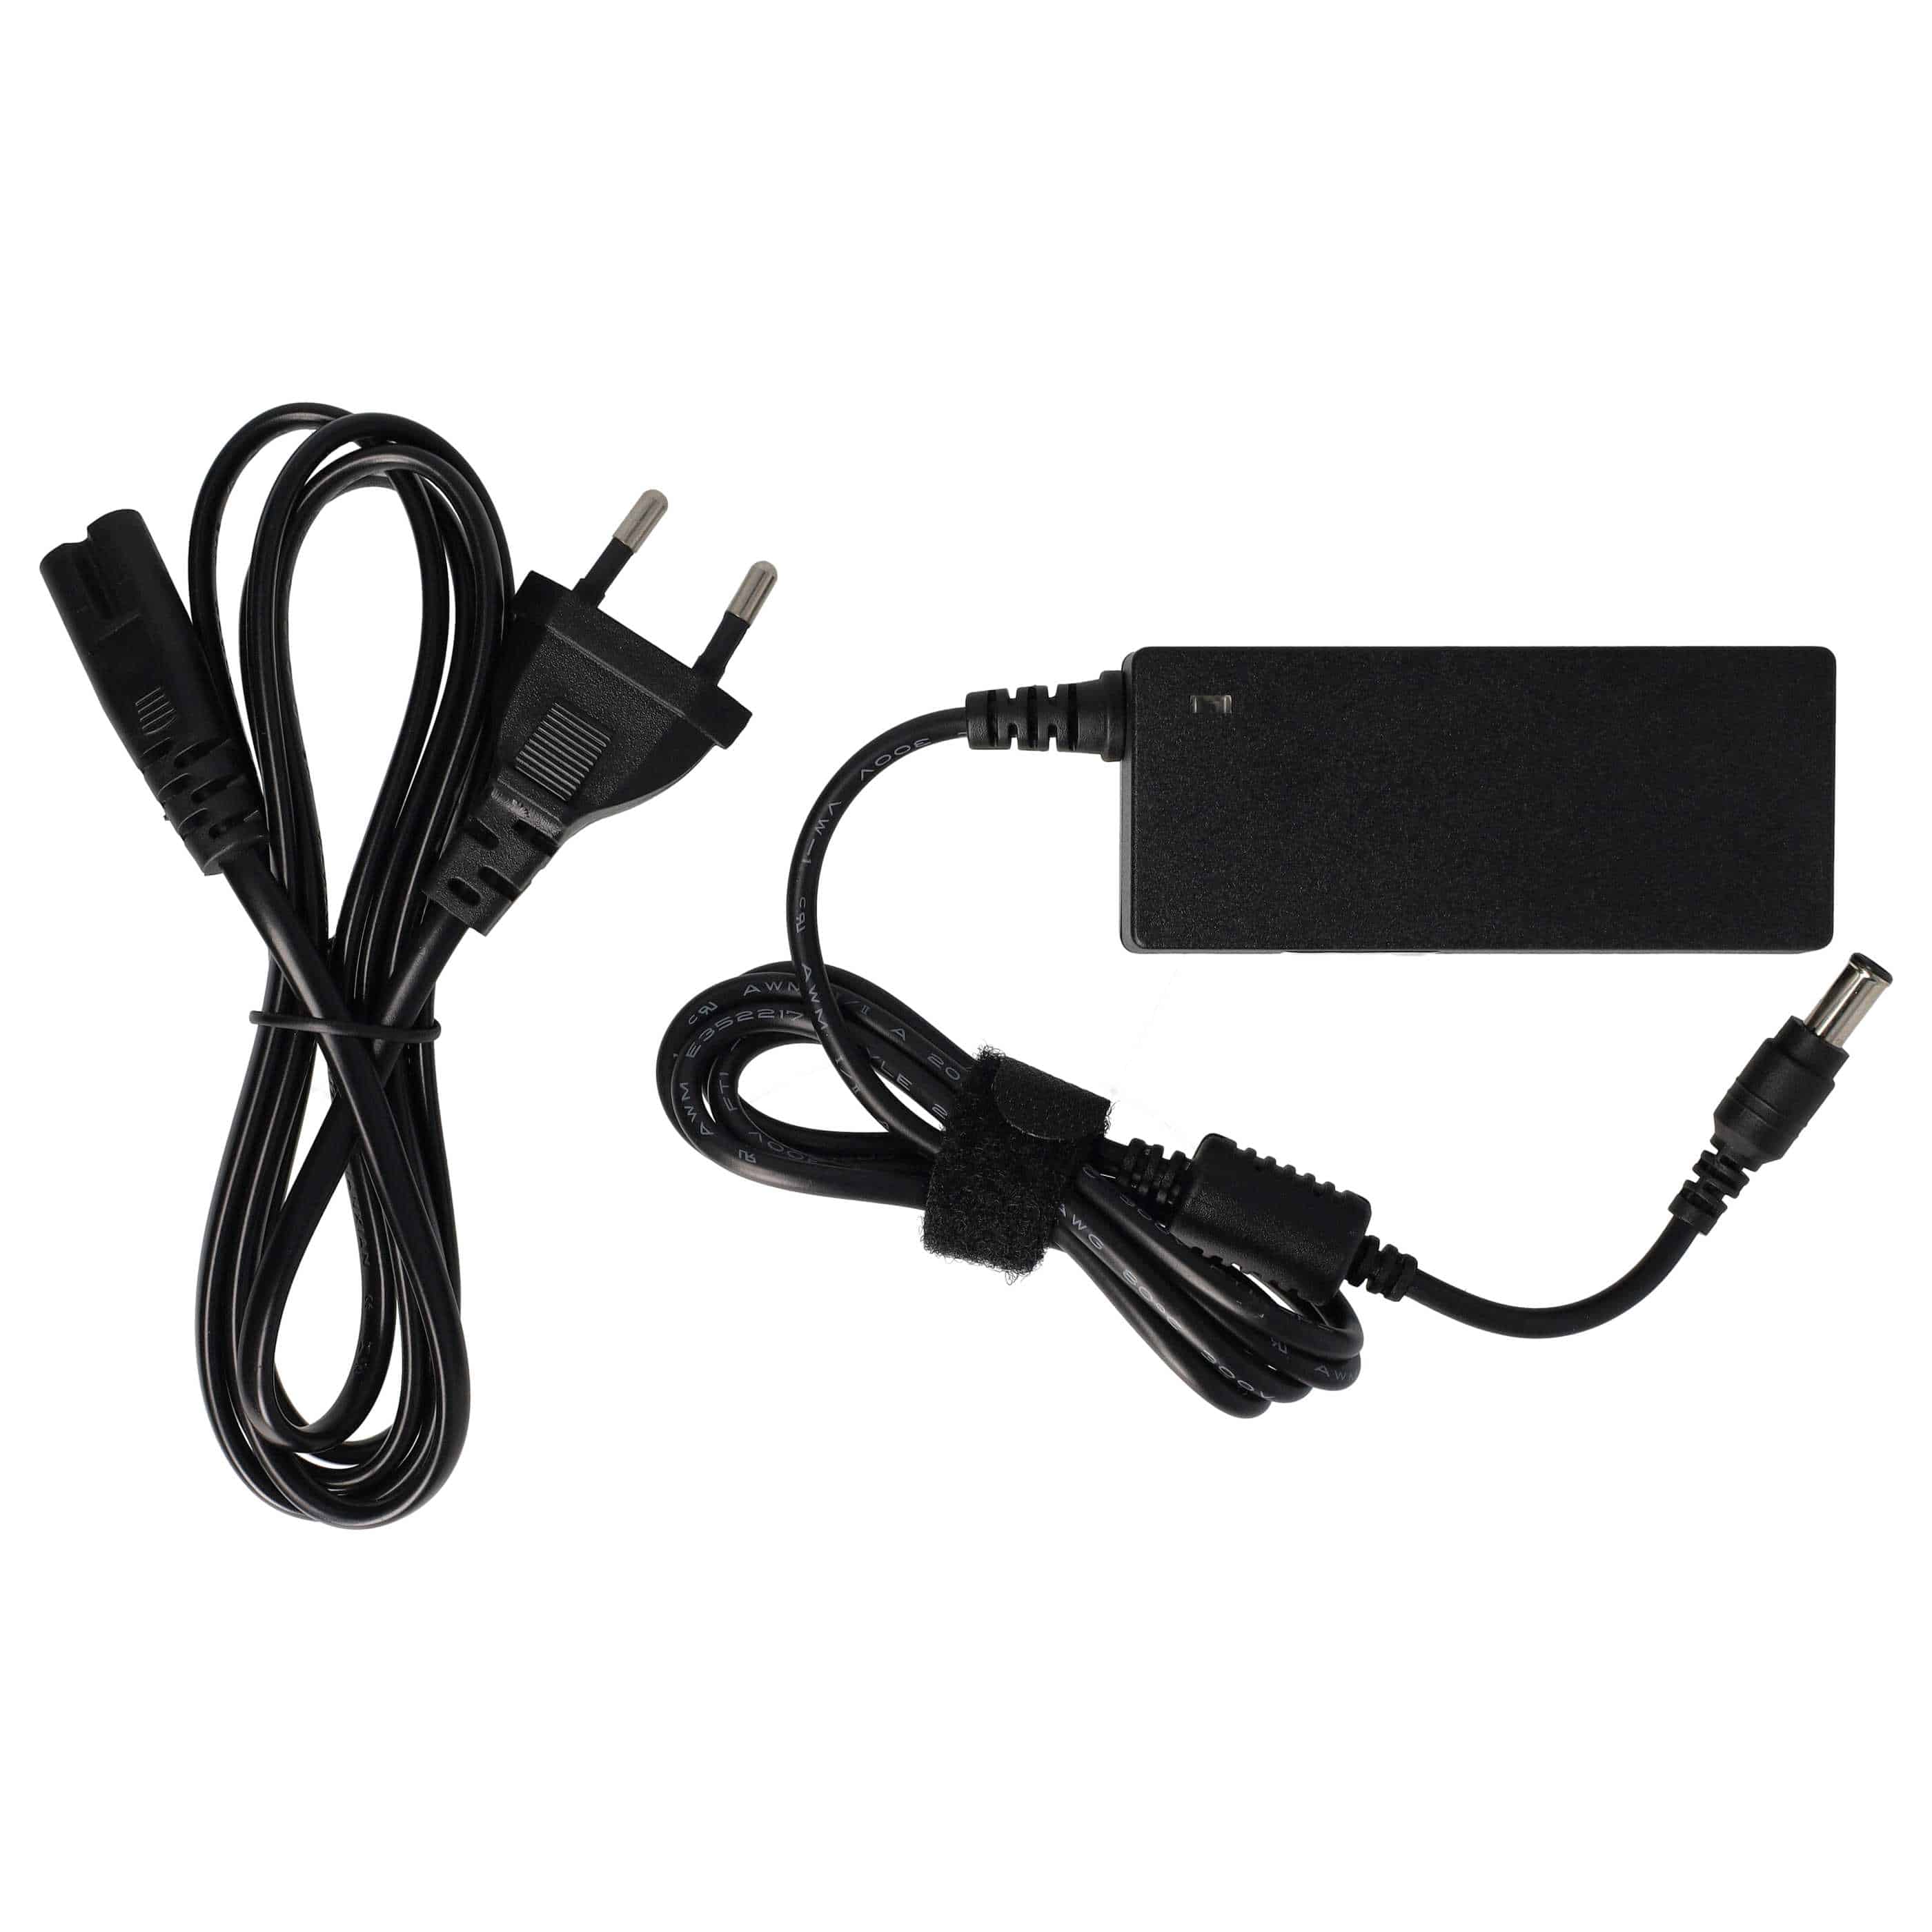 Mains Power Adapter replaces Samsung AD-3014, AD-3014B, 14030GPCN, A3014VE for IBMNotebook etc. - 200 cm, 42 W